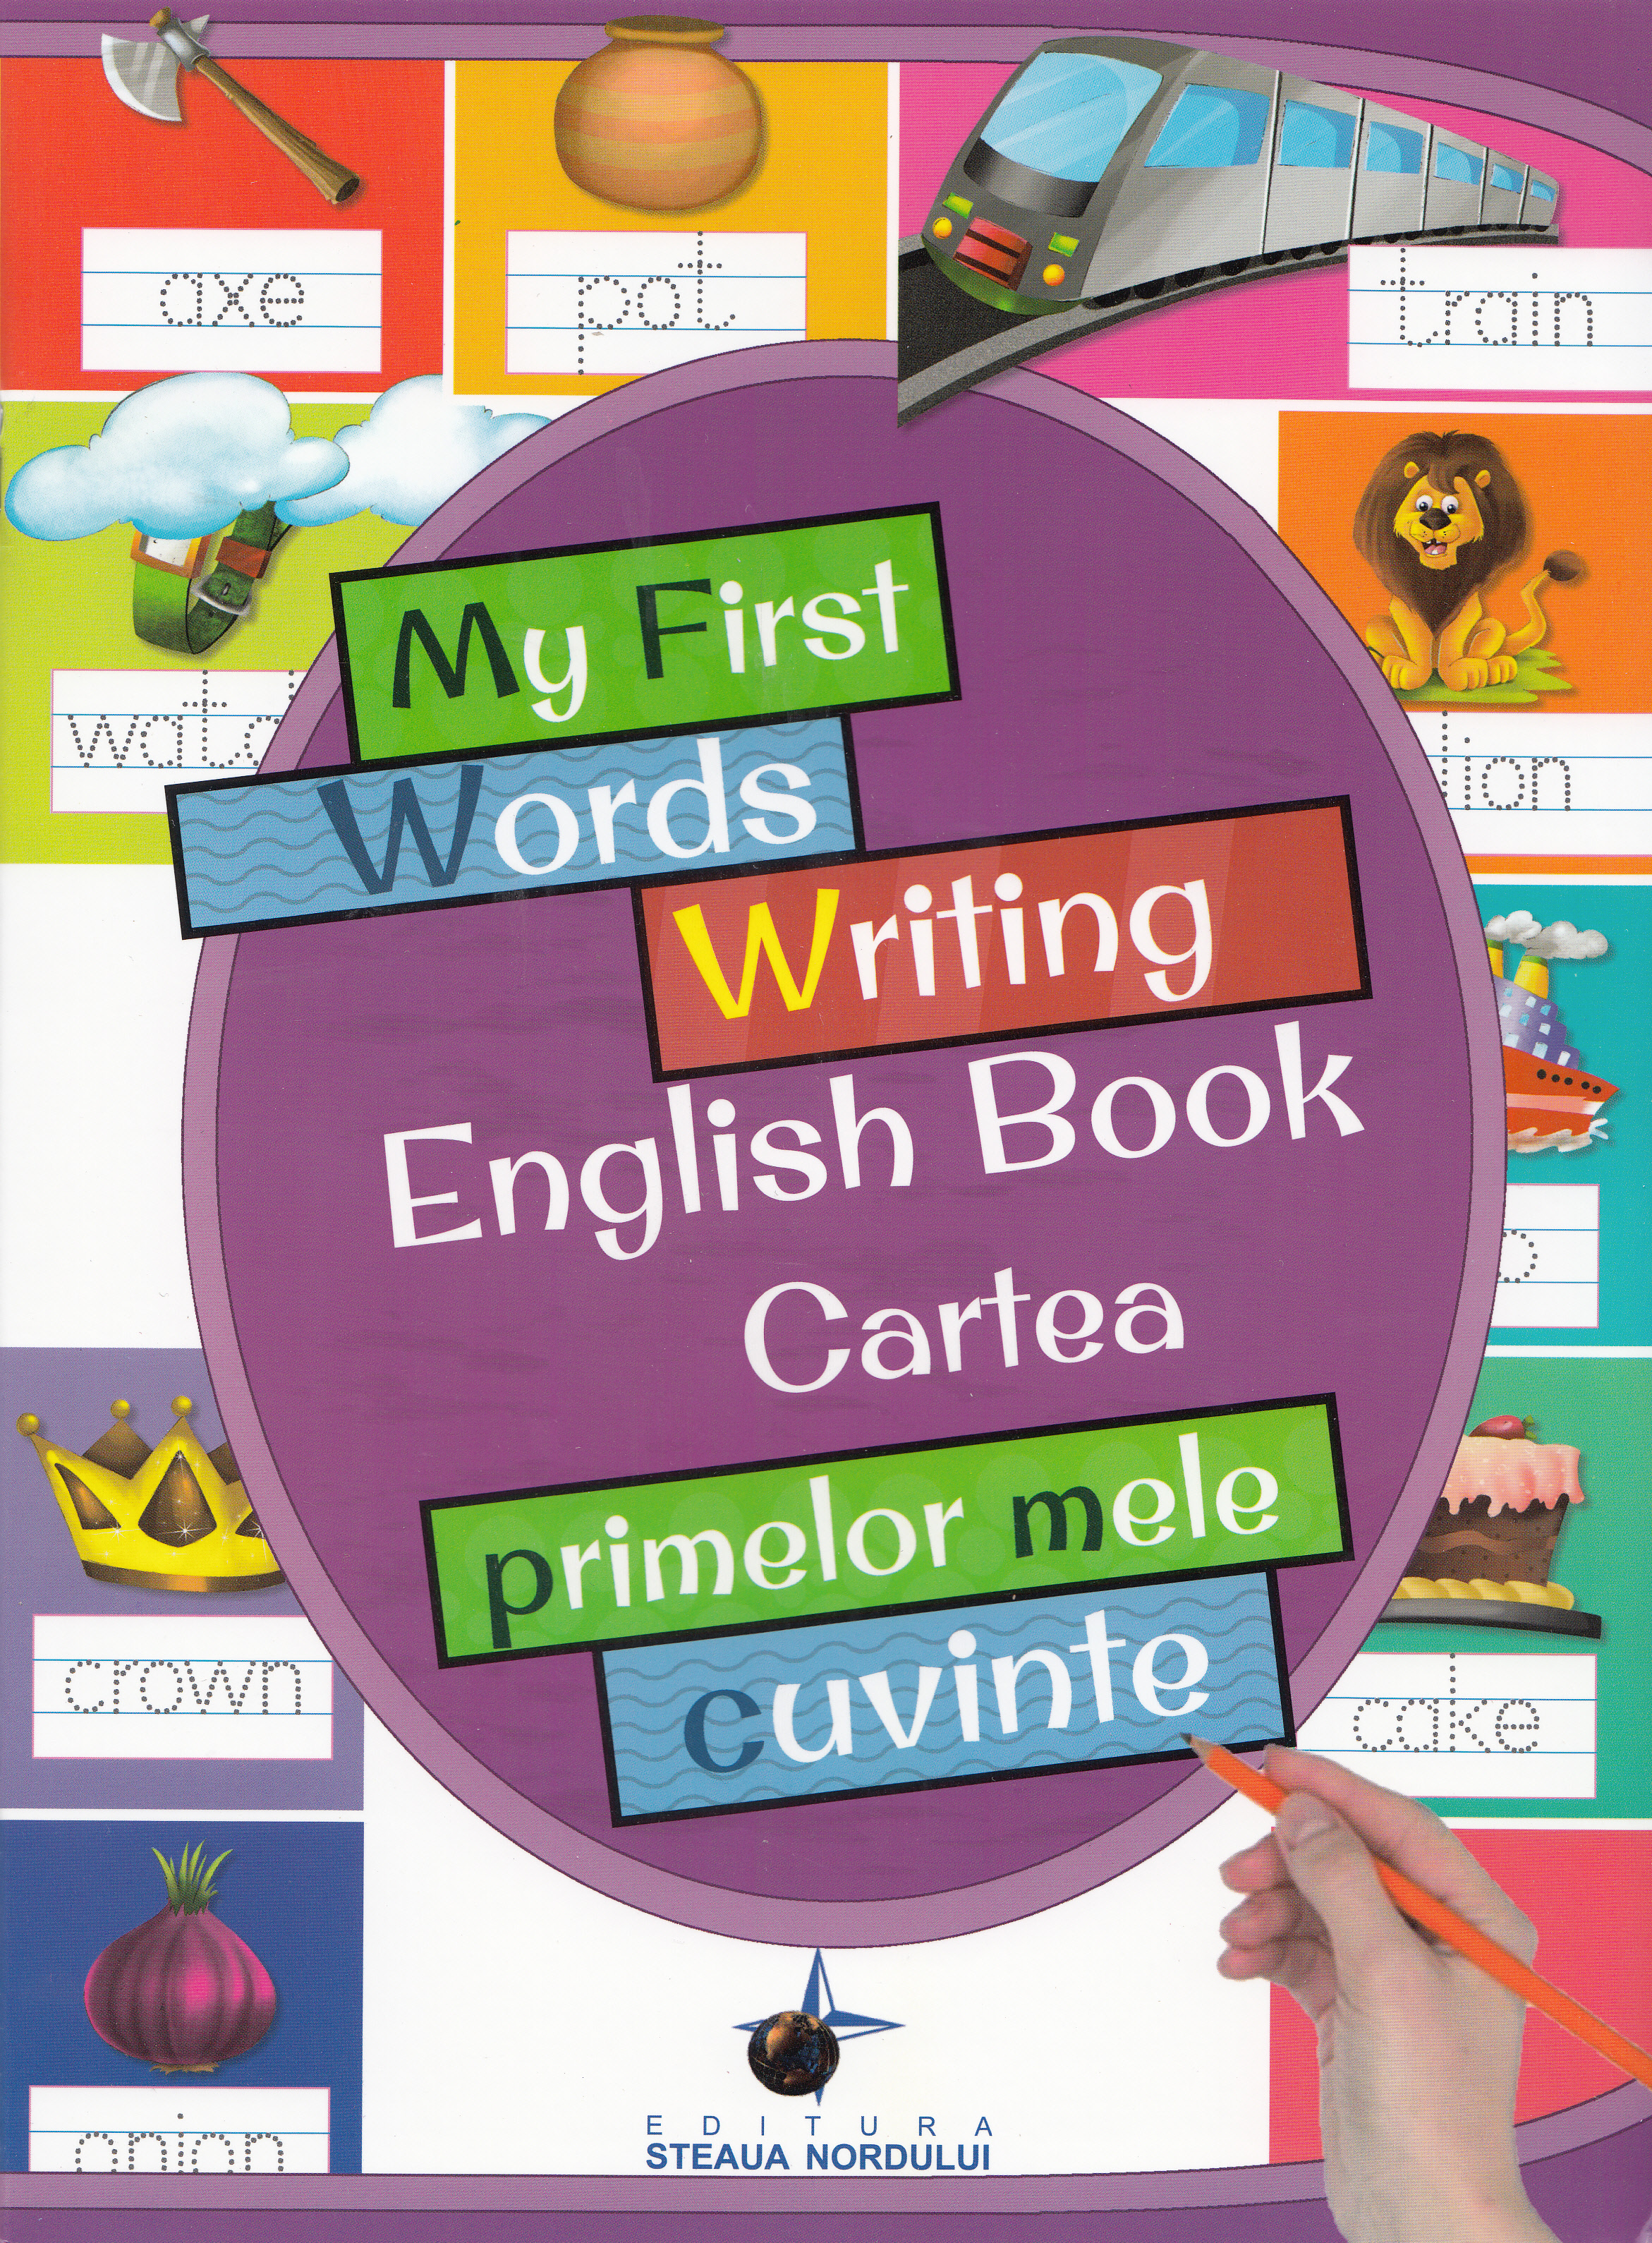 My First Words Writing English Book. Cartea primelor mele cuvinte